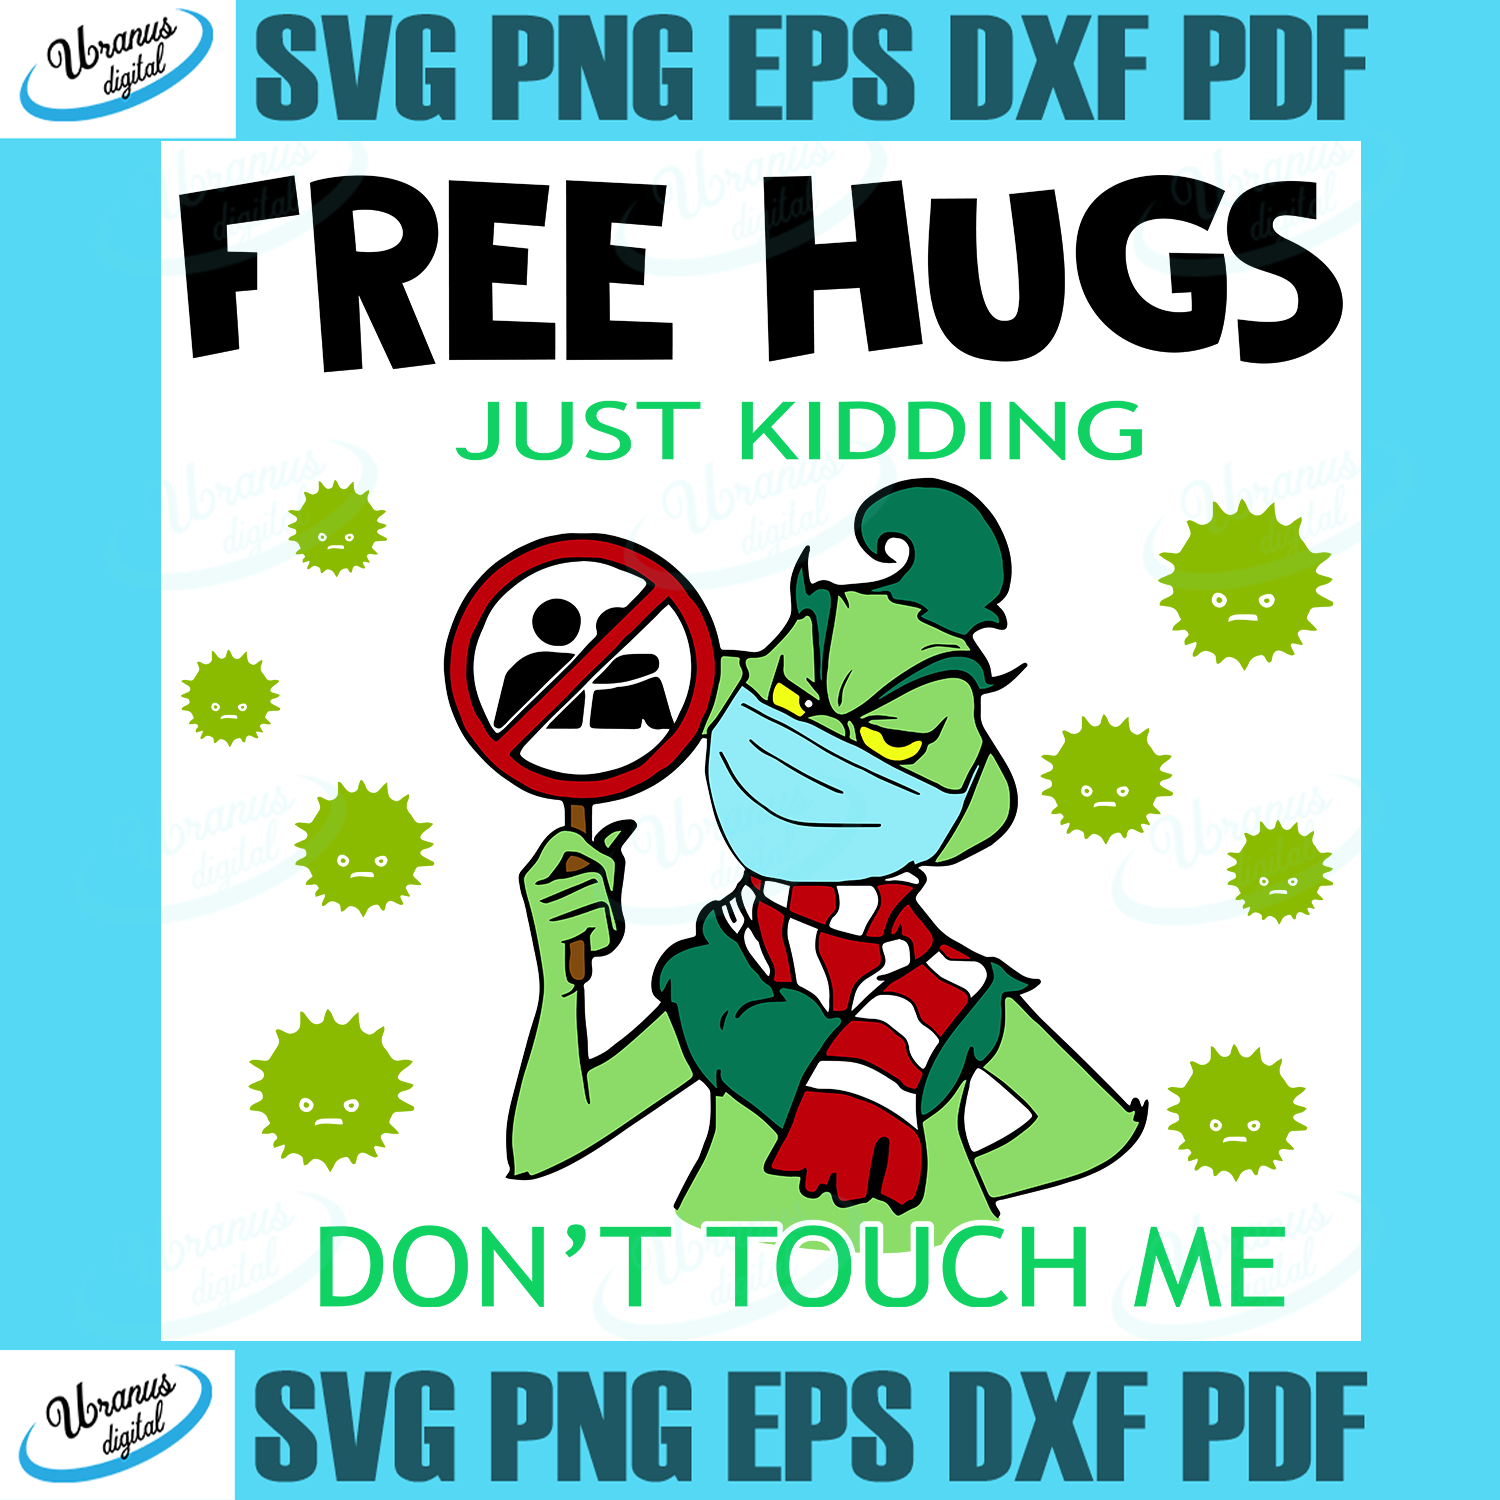 Trending Svg Free Hugs Just Kidding Dont Touch Me Svg Svg Grinch Svg Grinch Face Mask Svg Grinch Lover Svg Svg Cricut Silhouette Svg Files Cricut Svg Silhouette Svg Svg Designs Vinyl Svg Uranusdigital